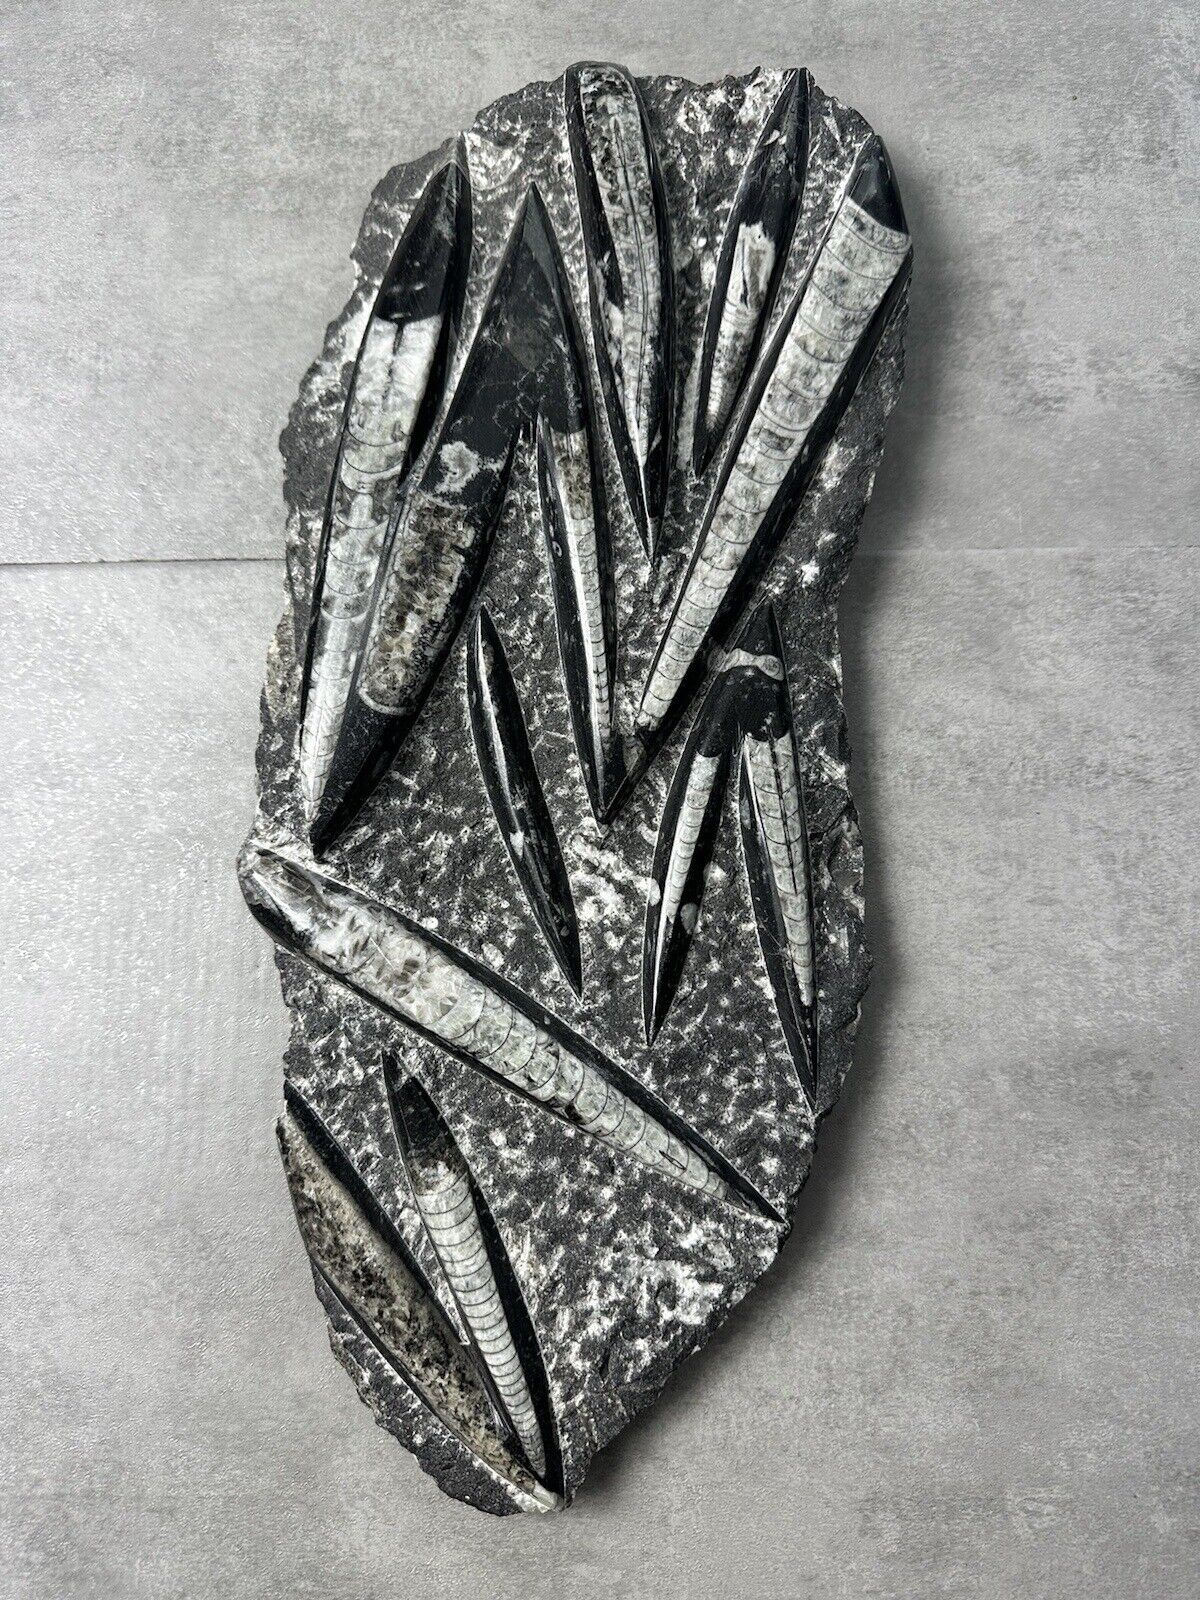 Orthoceras Fossilized Free Form Plate in Matrix 8 lbs 5 ounces 17 in 12 Specimen